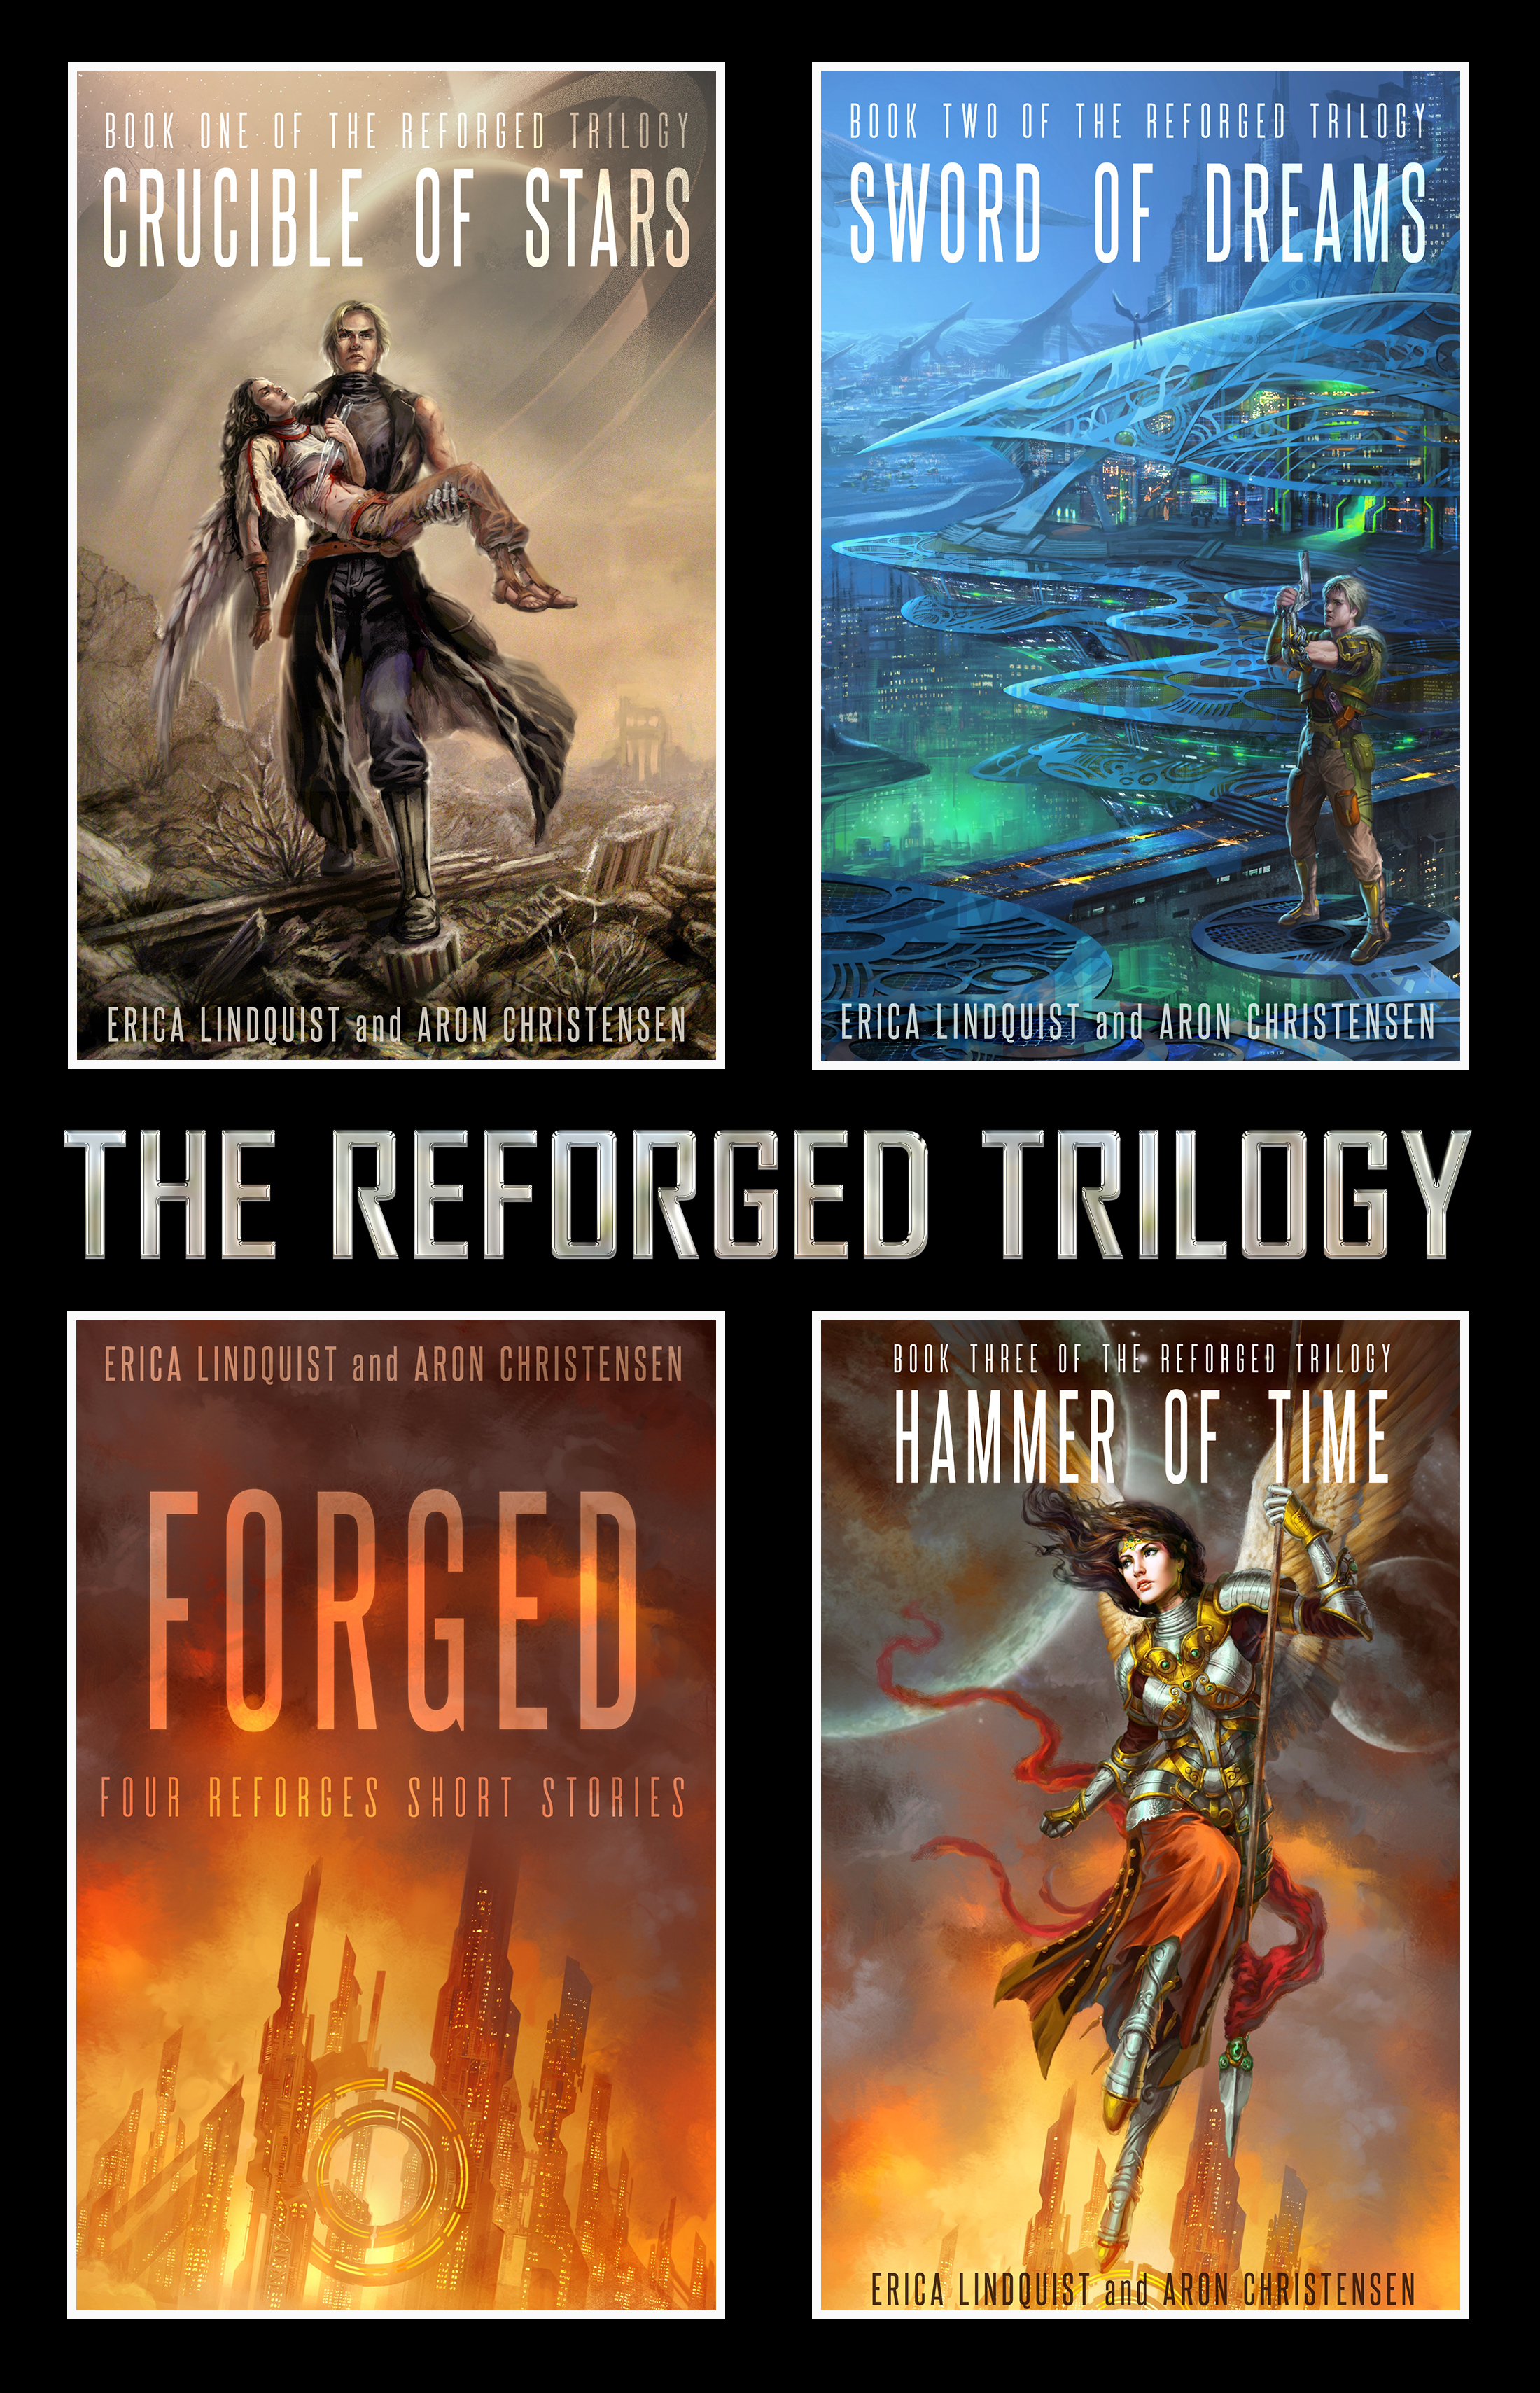 The Reforged Trilogy